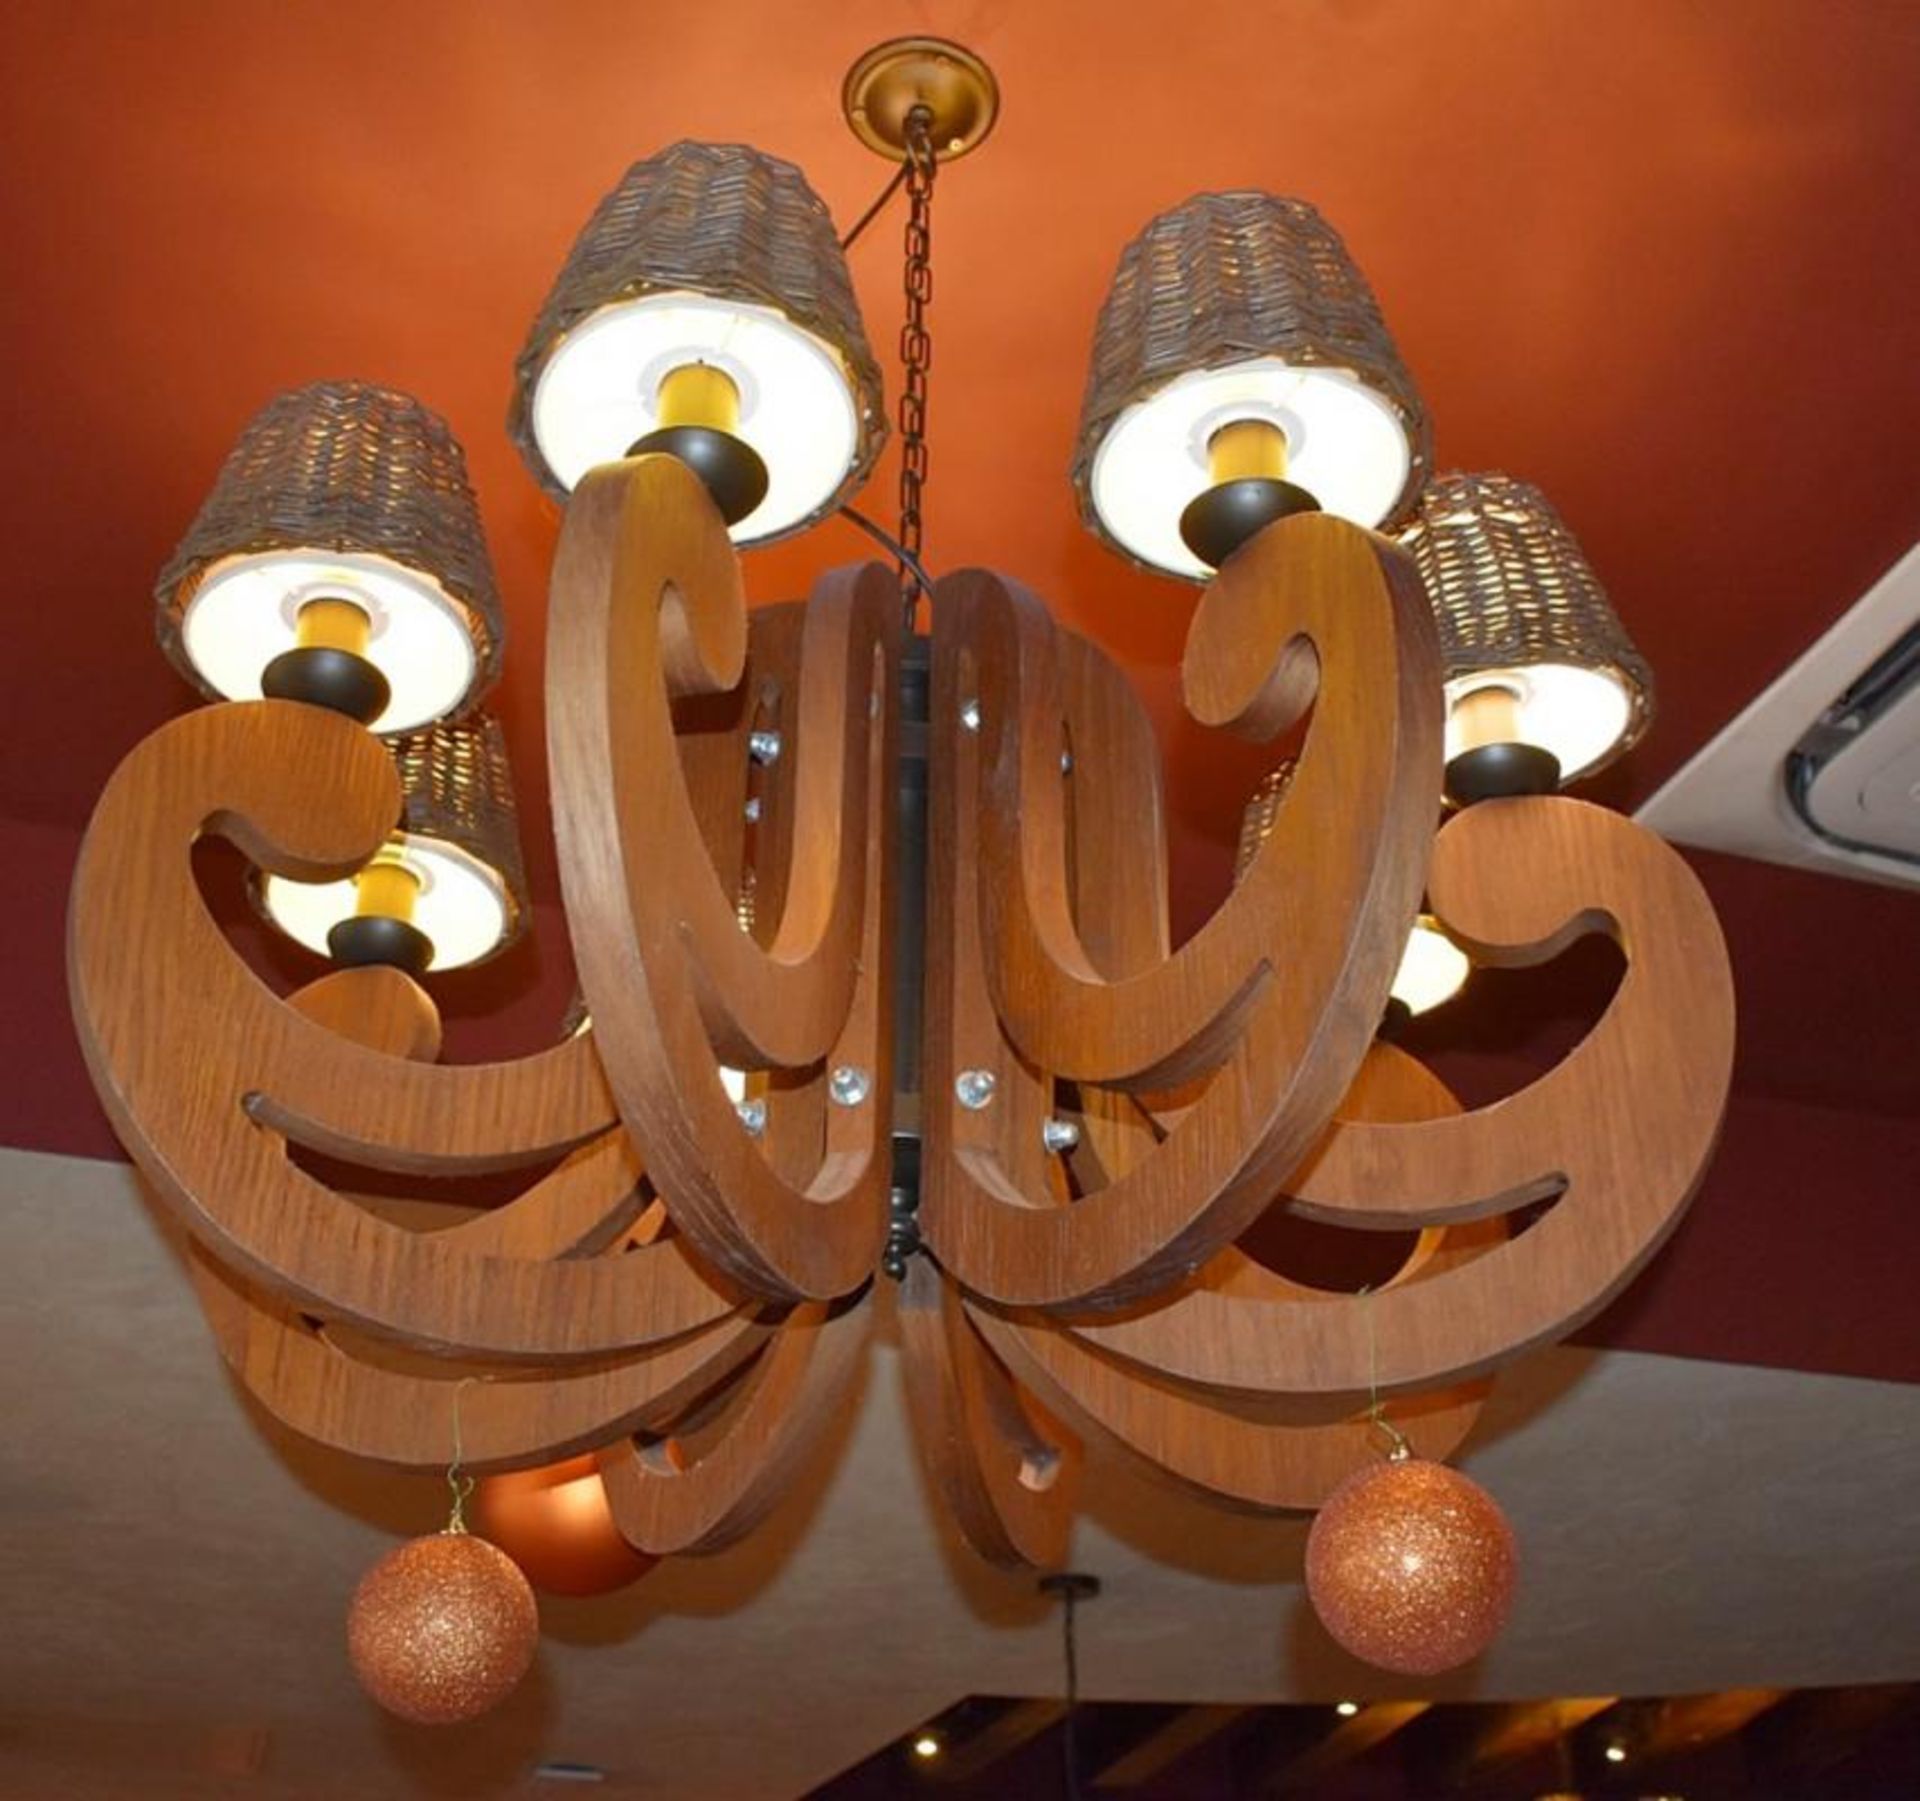 2 x Large Artisan Wooden Candelabra 8 Light Chandeliers - Approx Dimensions: Diameter 90cm - From - Image 5 of 6